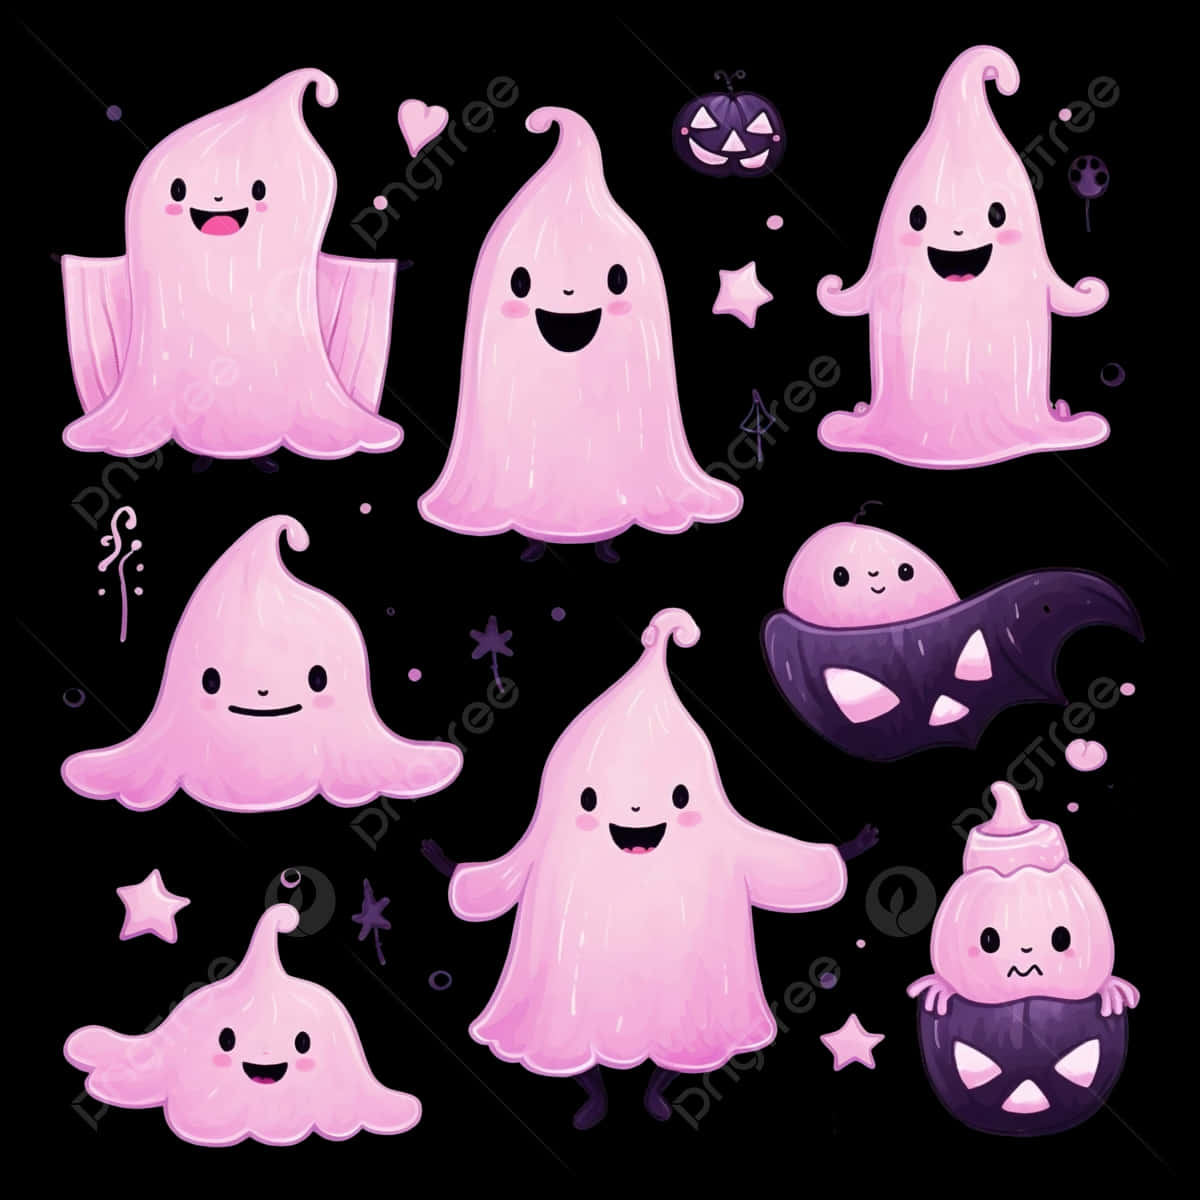 Pastel_ Pink_ Ghost_ Collection Wallpaper